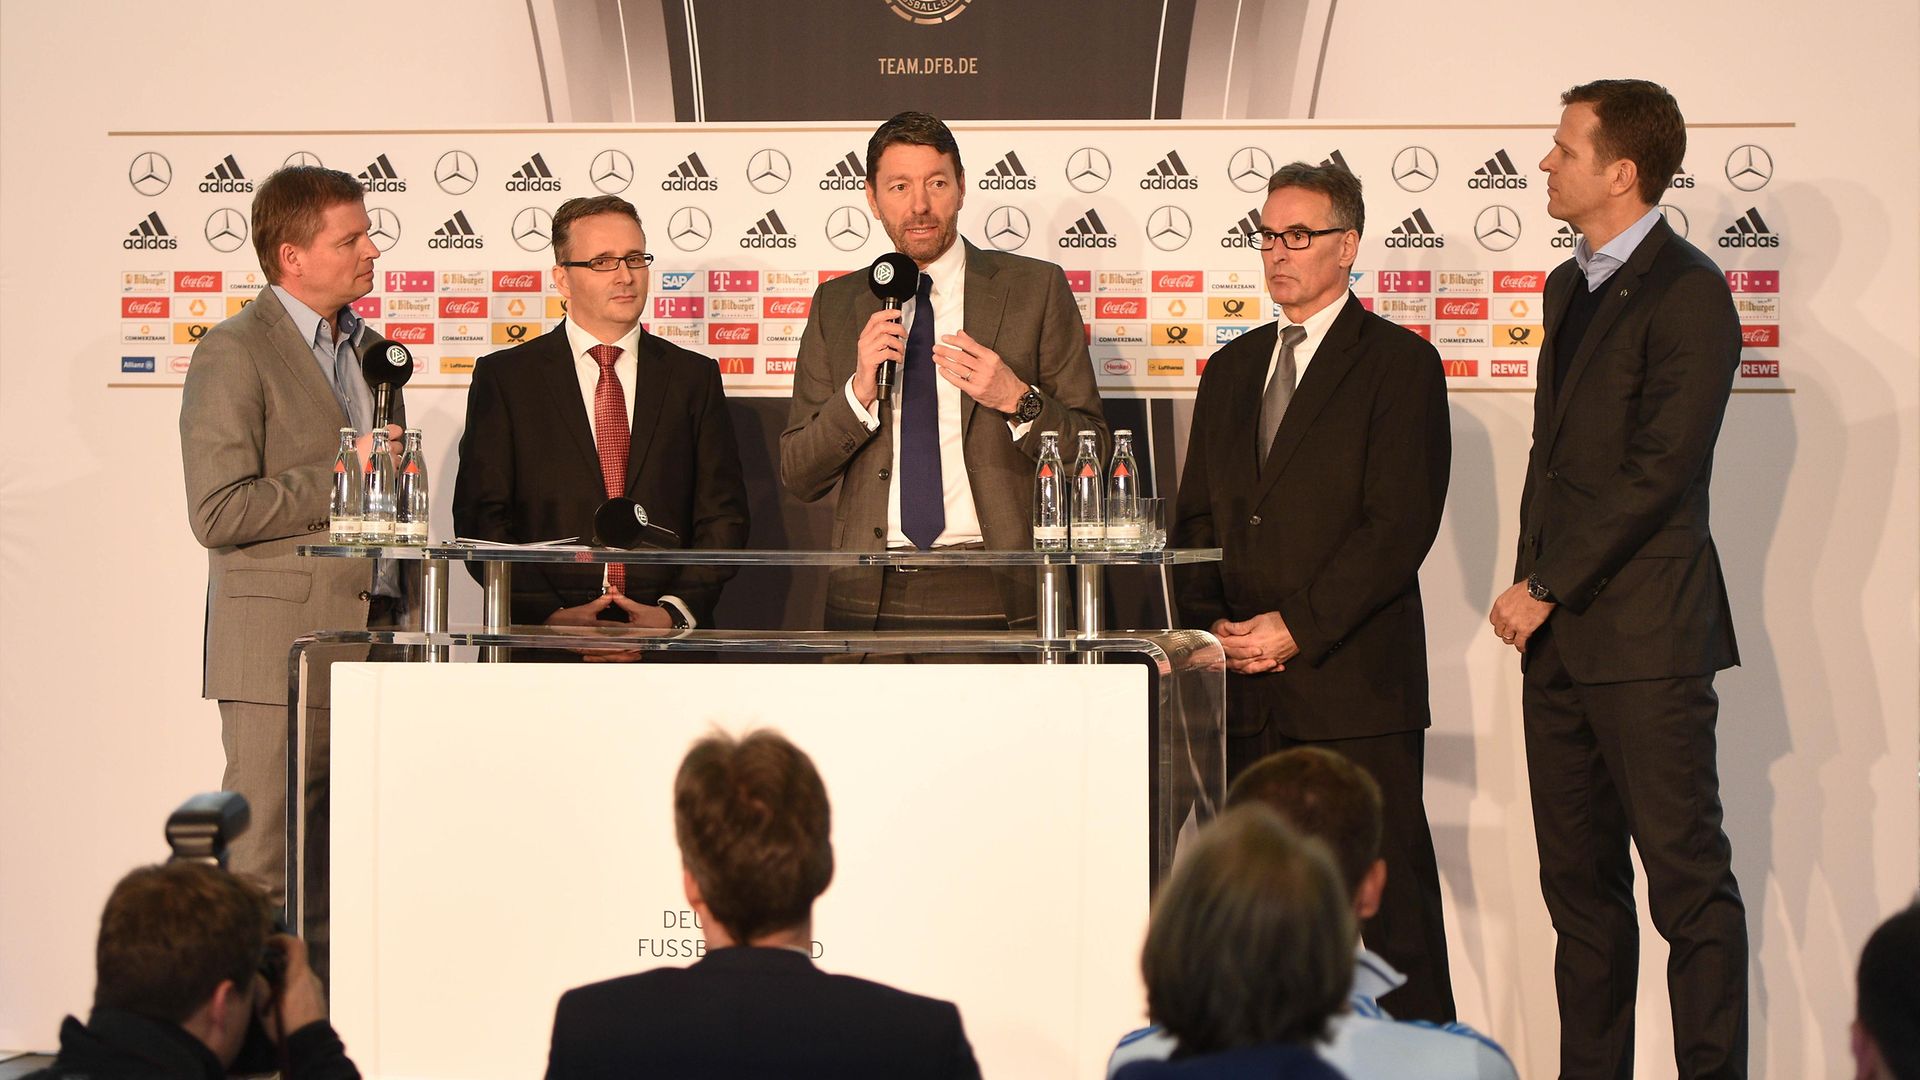 Press conference at DFB headquarters with Henkel CEO Kasper Rorsted (center).